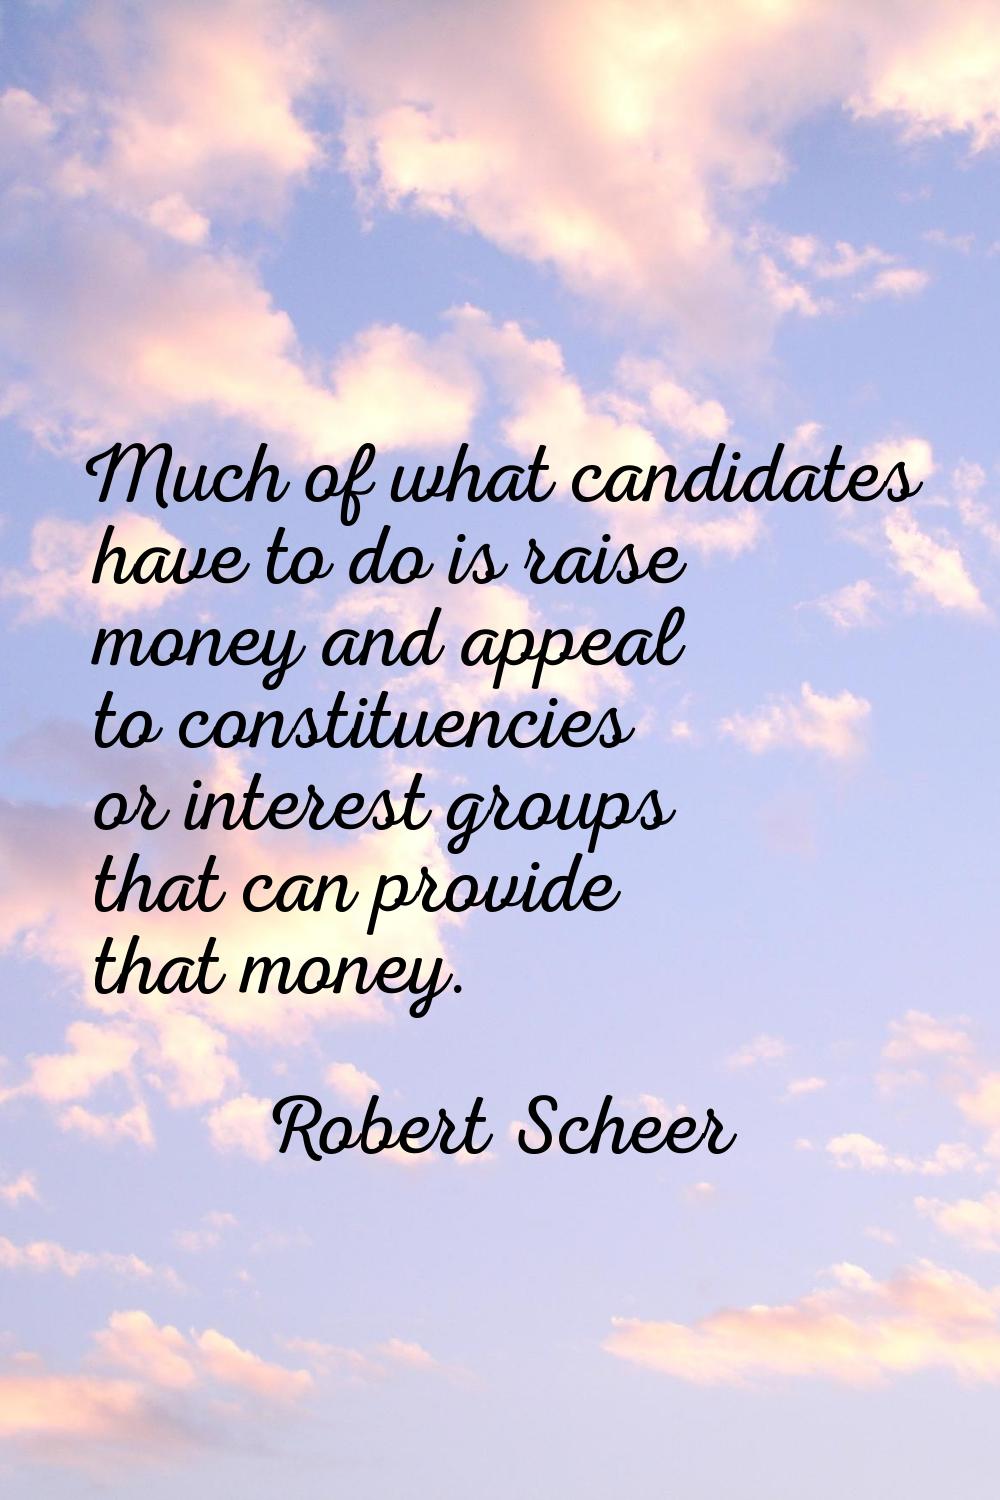 Much of what candidates have to do is raise money and appeal to constituencies or interest groups t